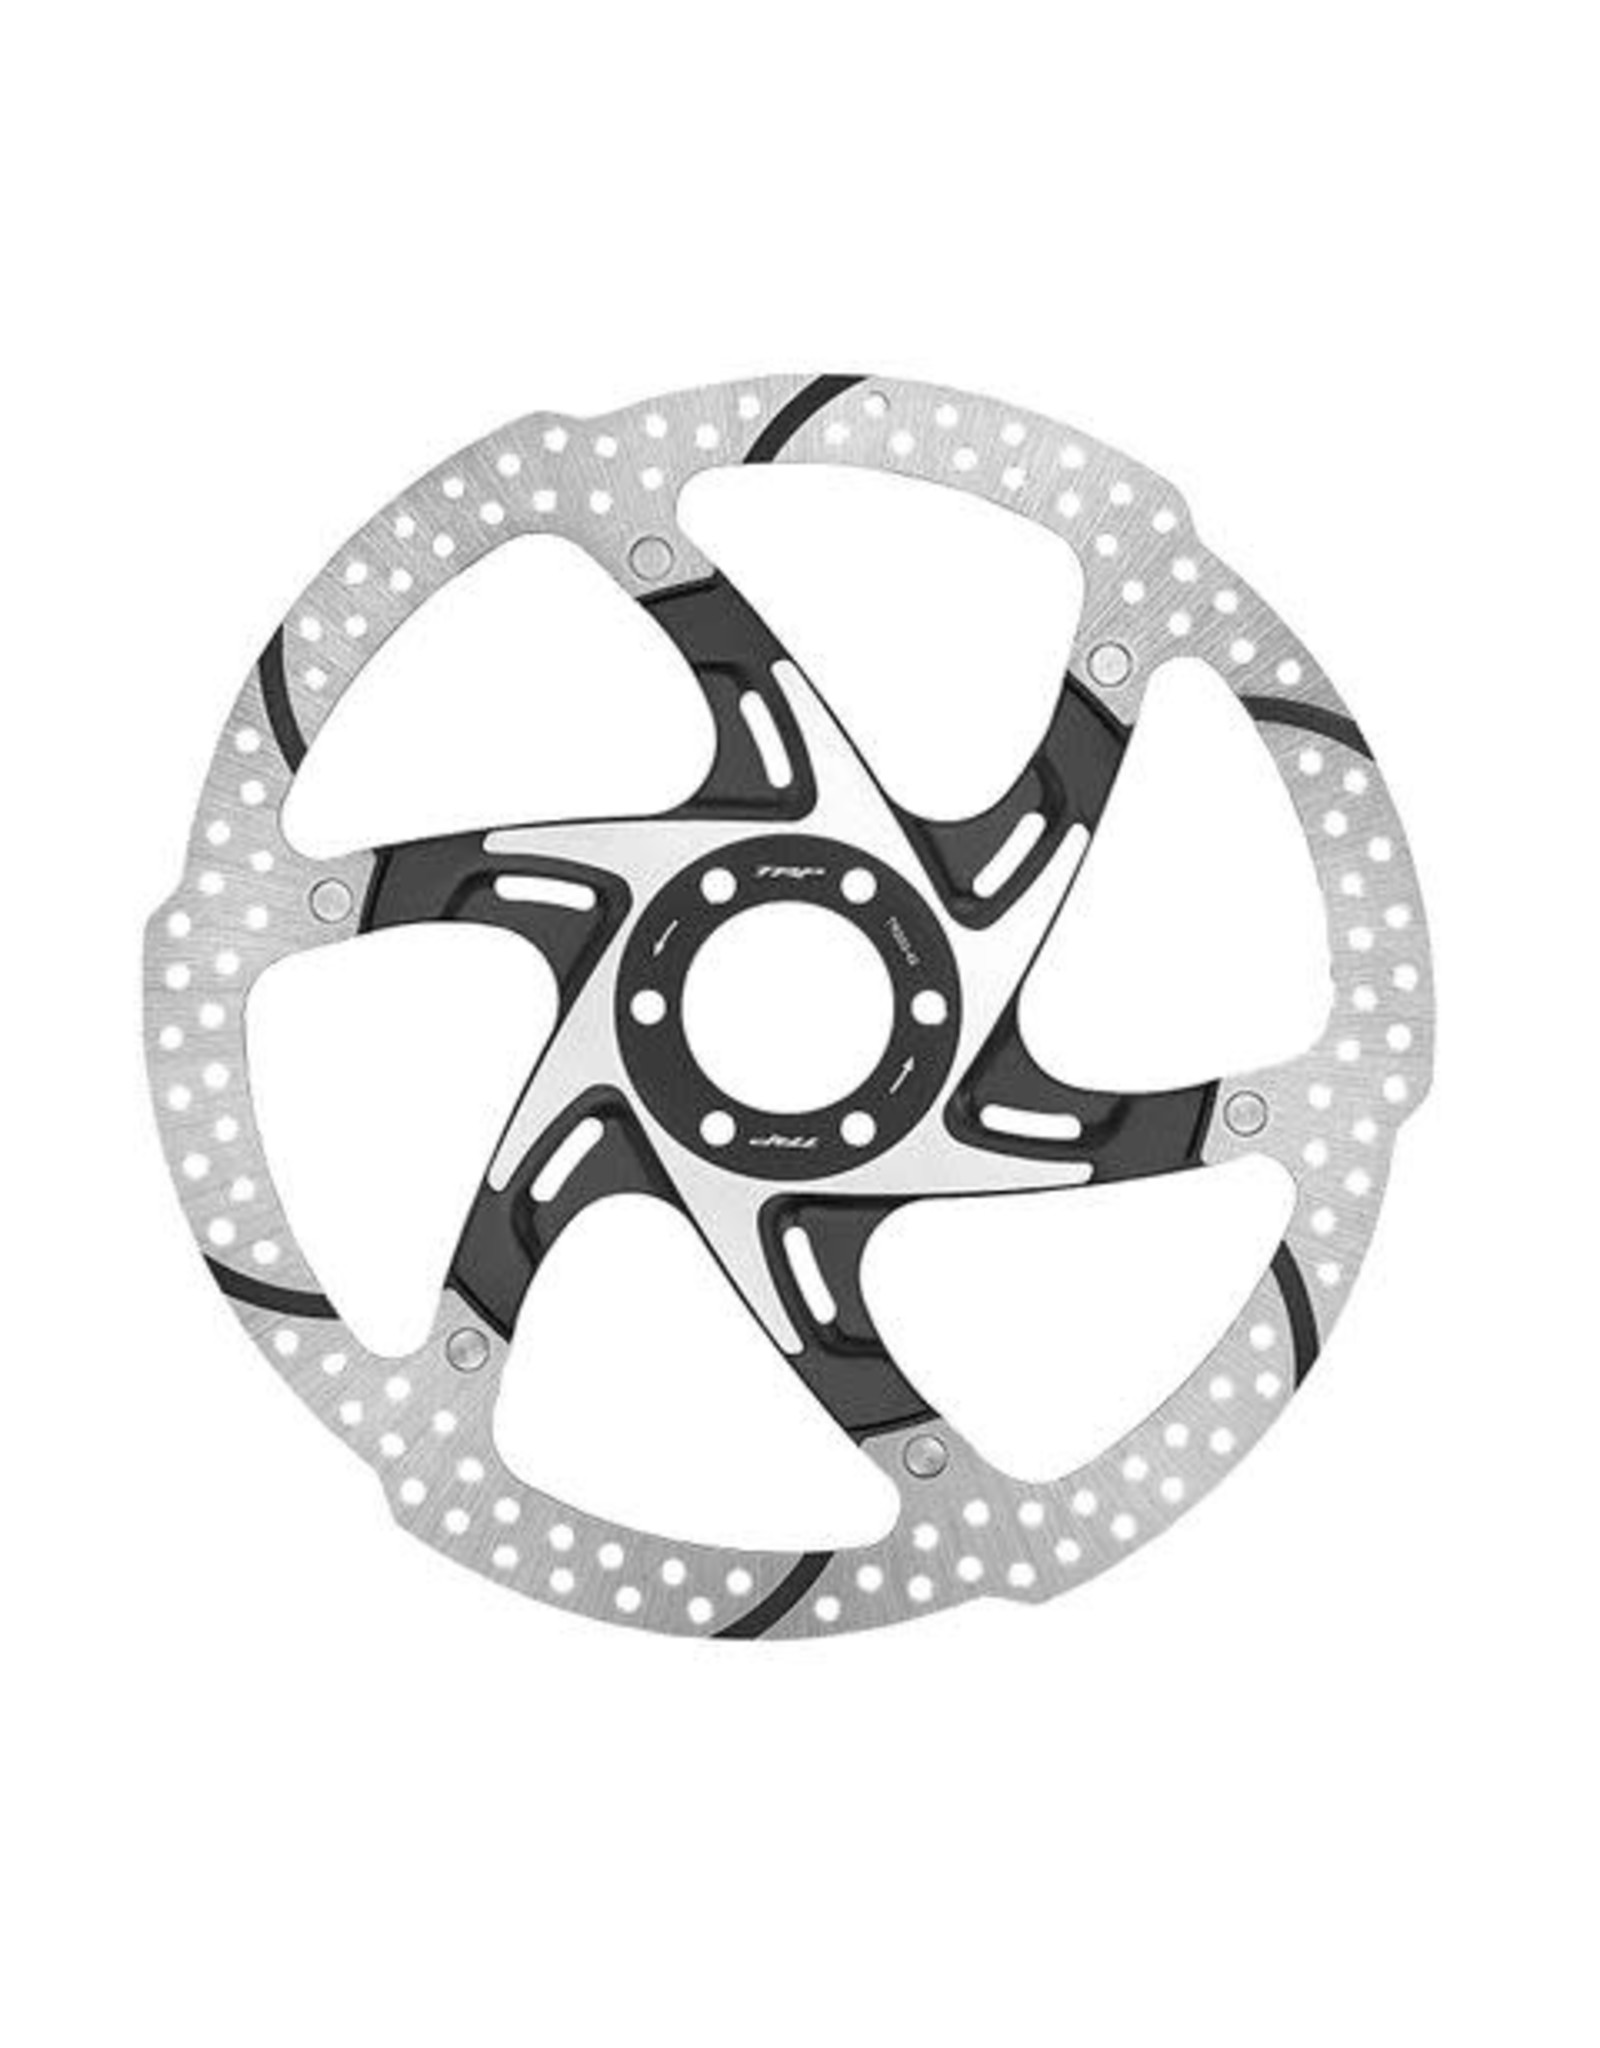 TRP TRP TR-33 1.8MM 2 PIECE 180MM 6 BOLT STAINLESS STEEL DISC BRAKE ROTOR